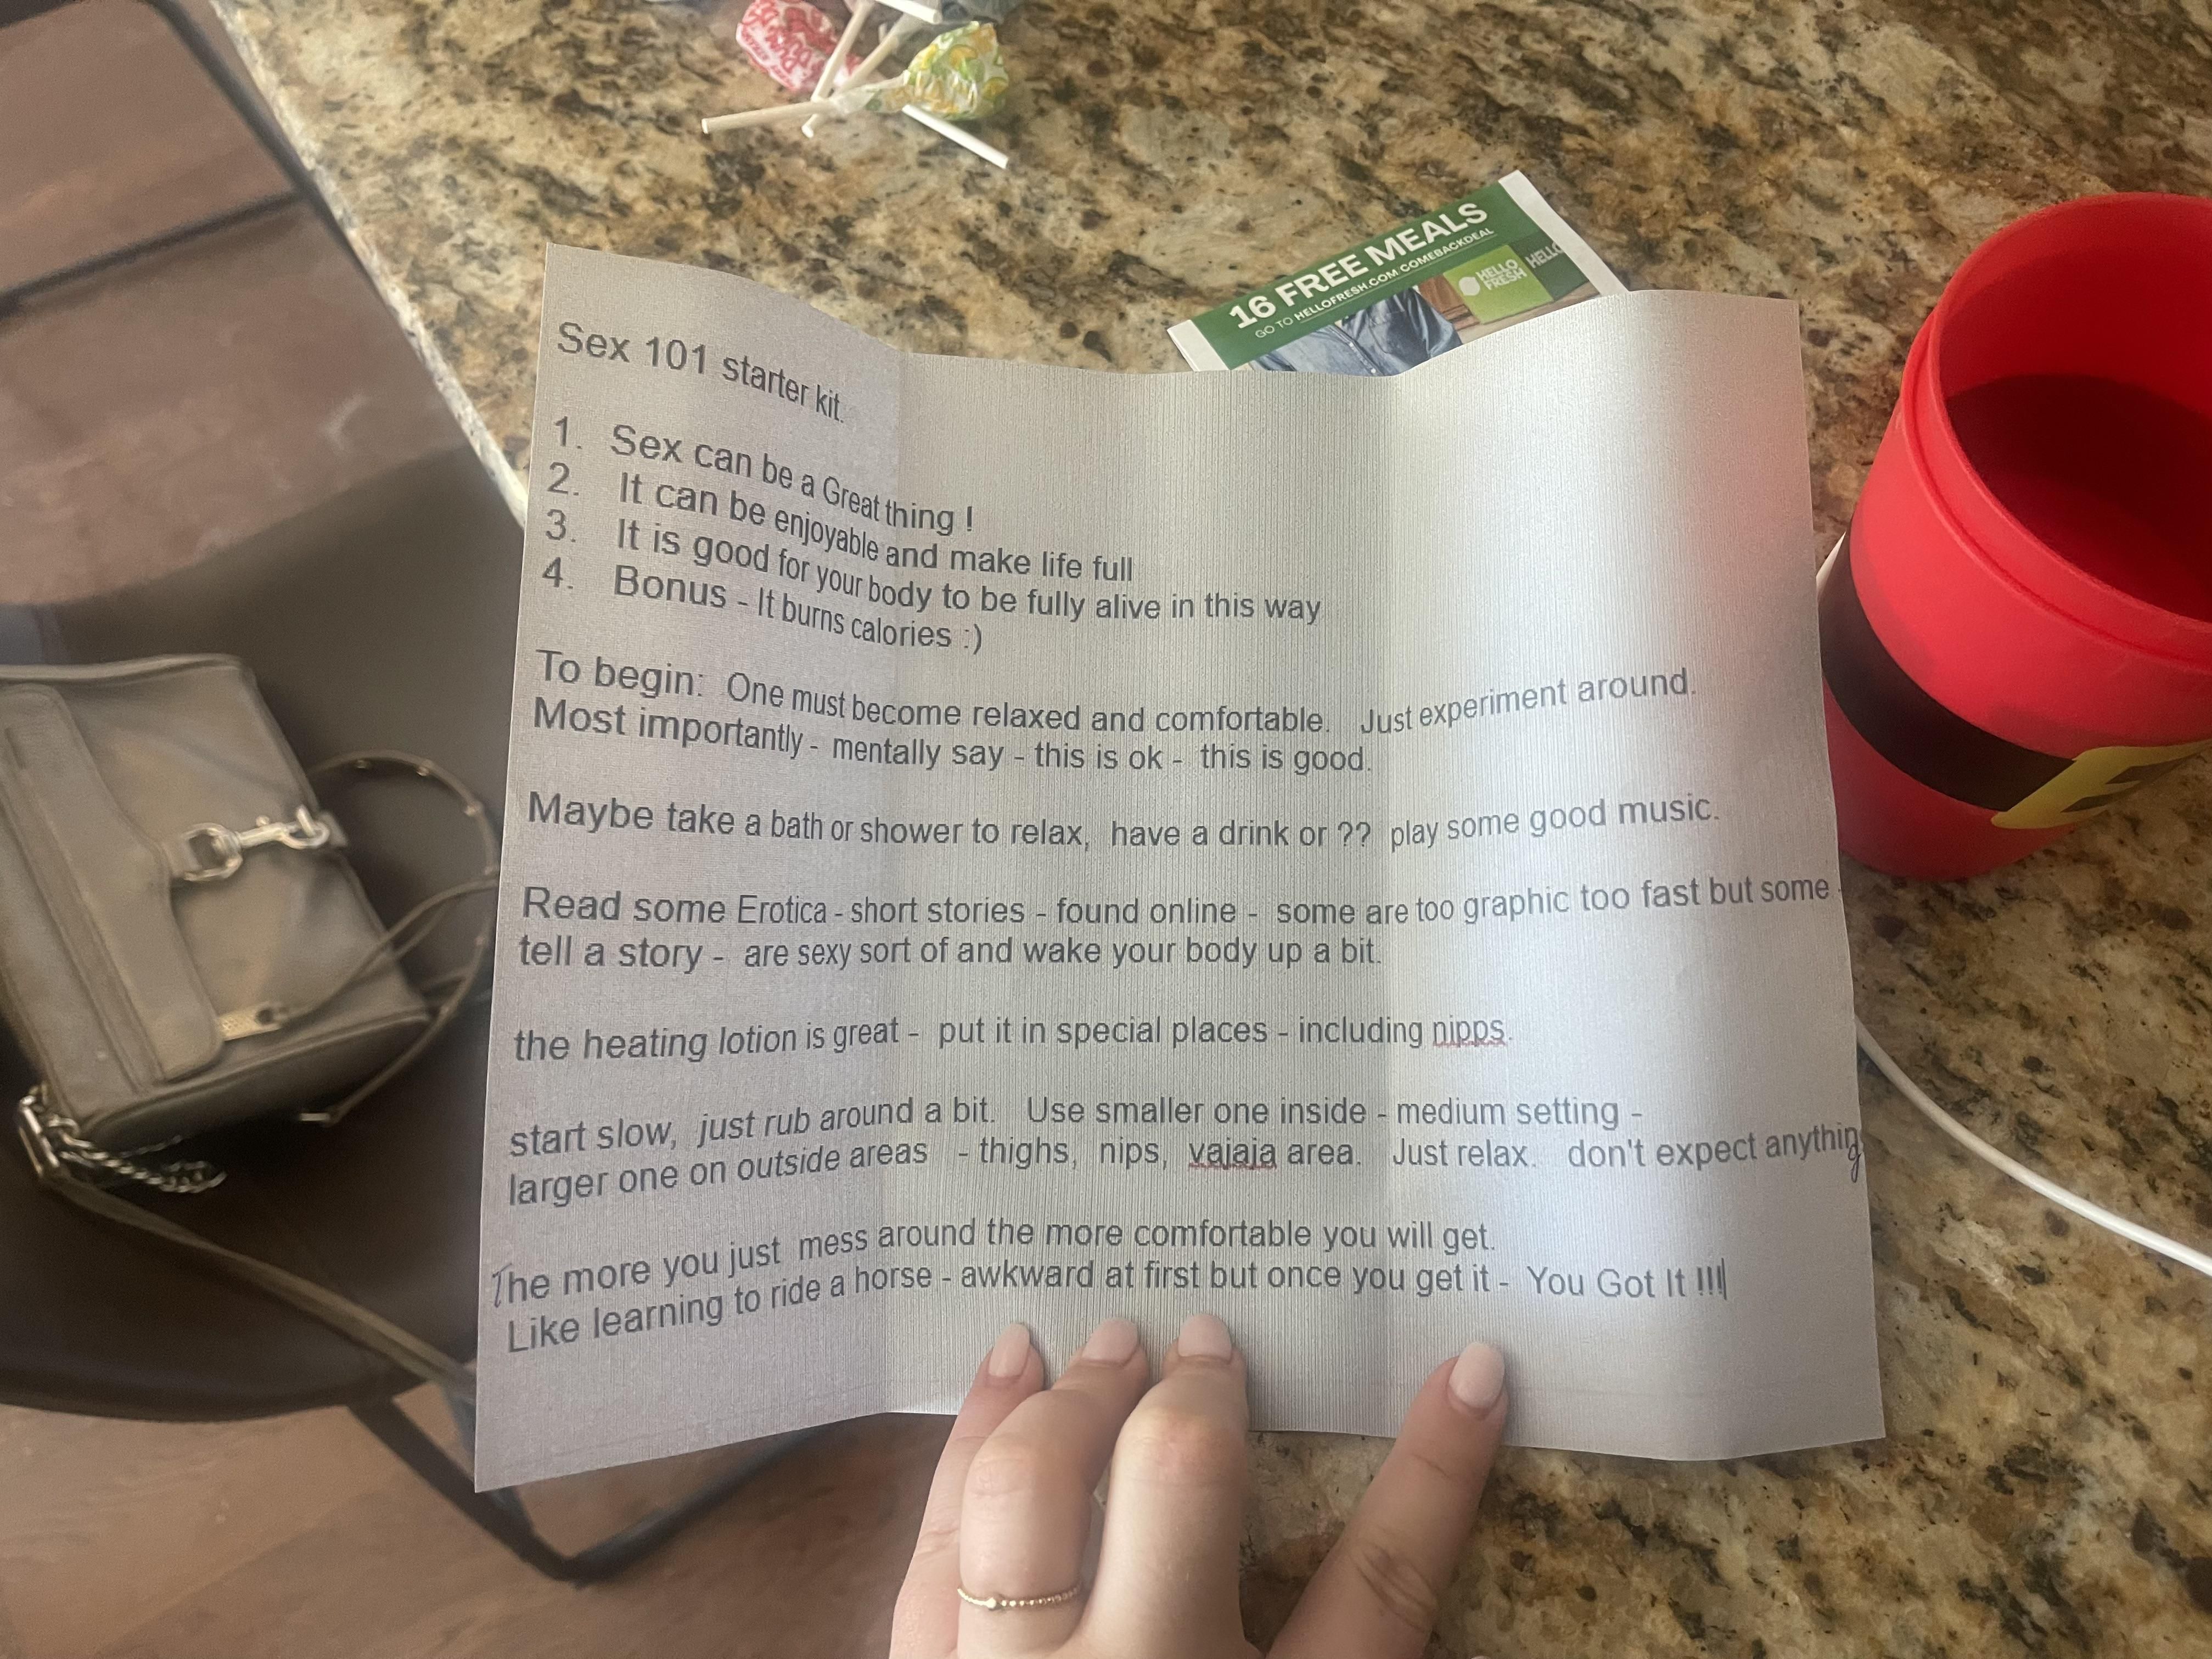 My friends mom mailed her a vibrator + included her own instructions